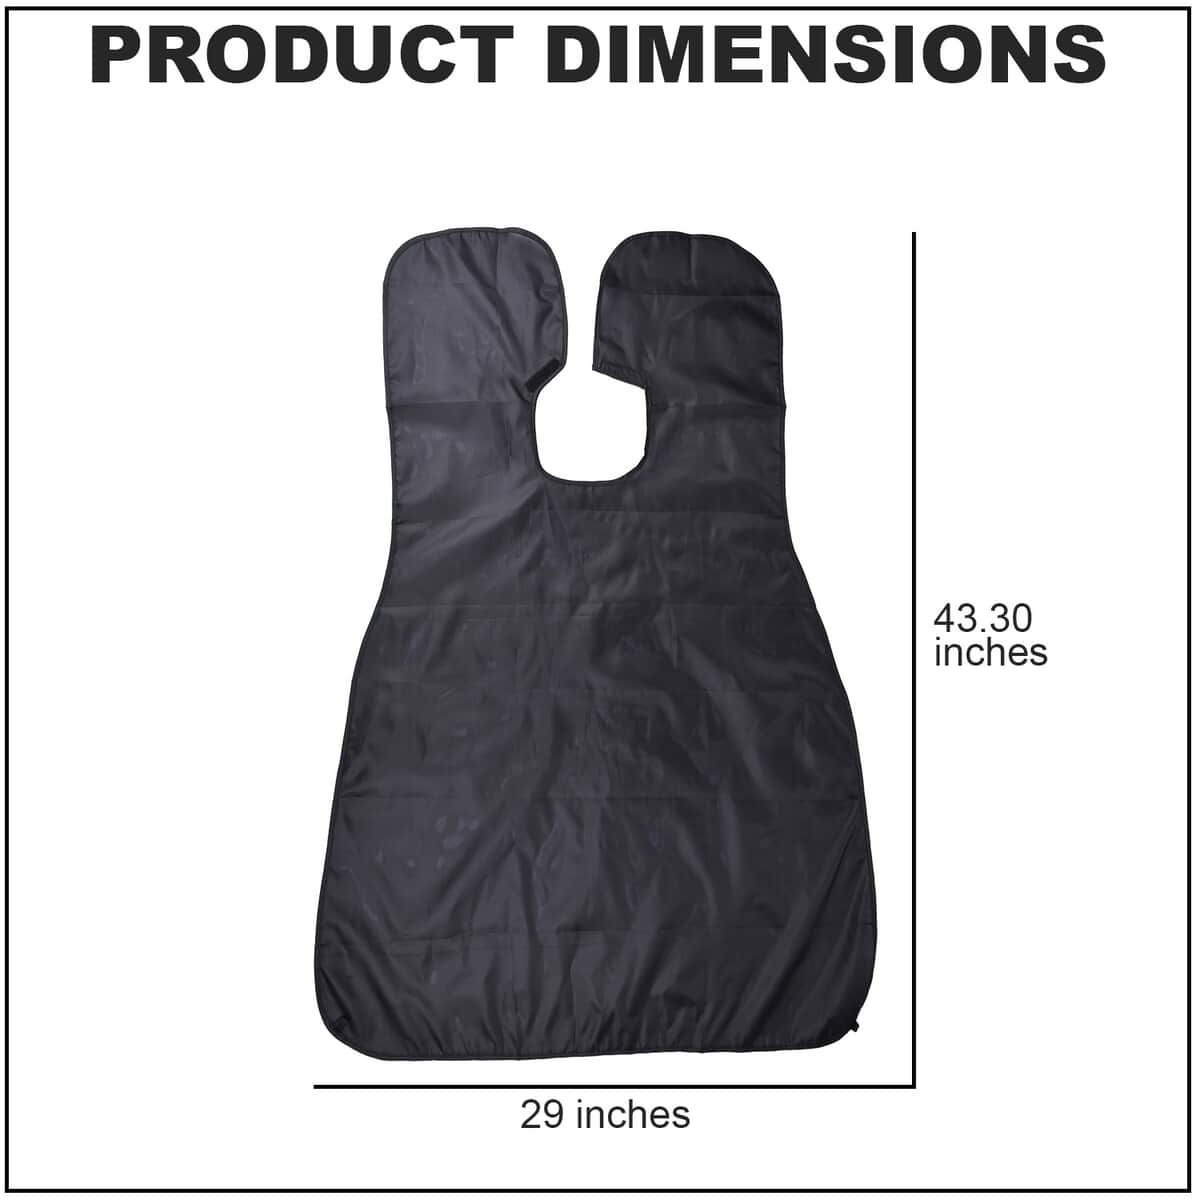 Male Beard Apron with 2 Suction Cup - Black (29"x43.3") image number 3